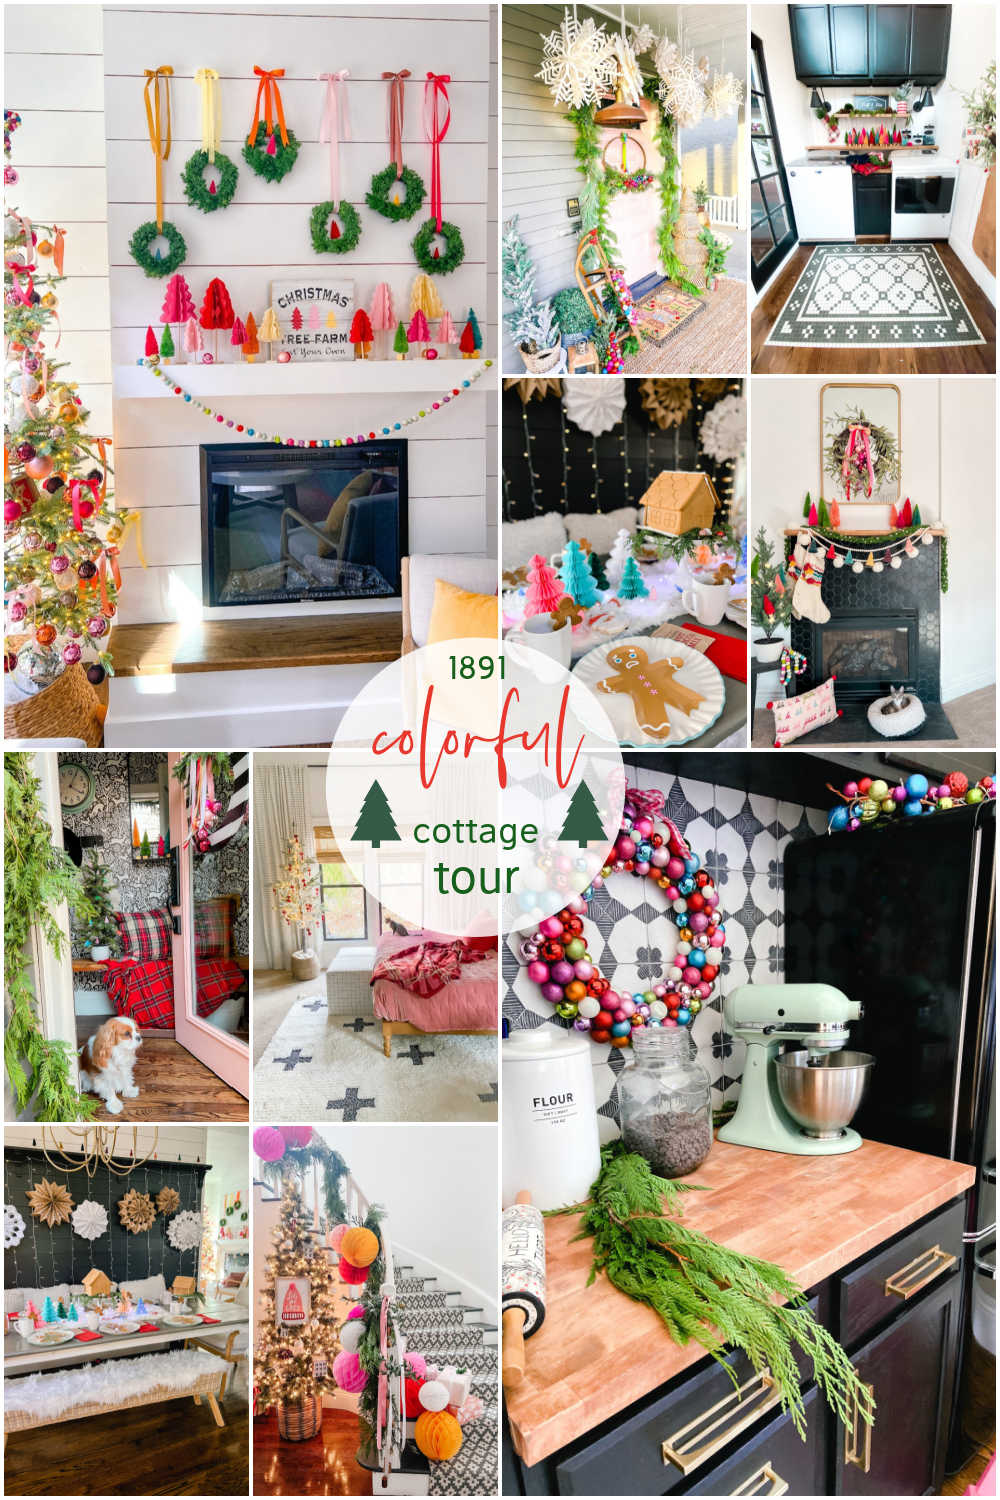 My Colorful Holiday Cottage Tour. Adding whimsical elements and colors to our historic home for the holidays with easy DIY ideas! 